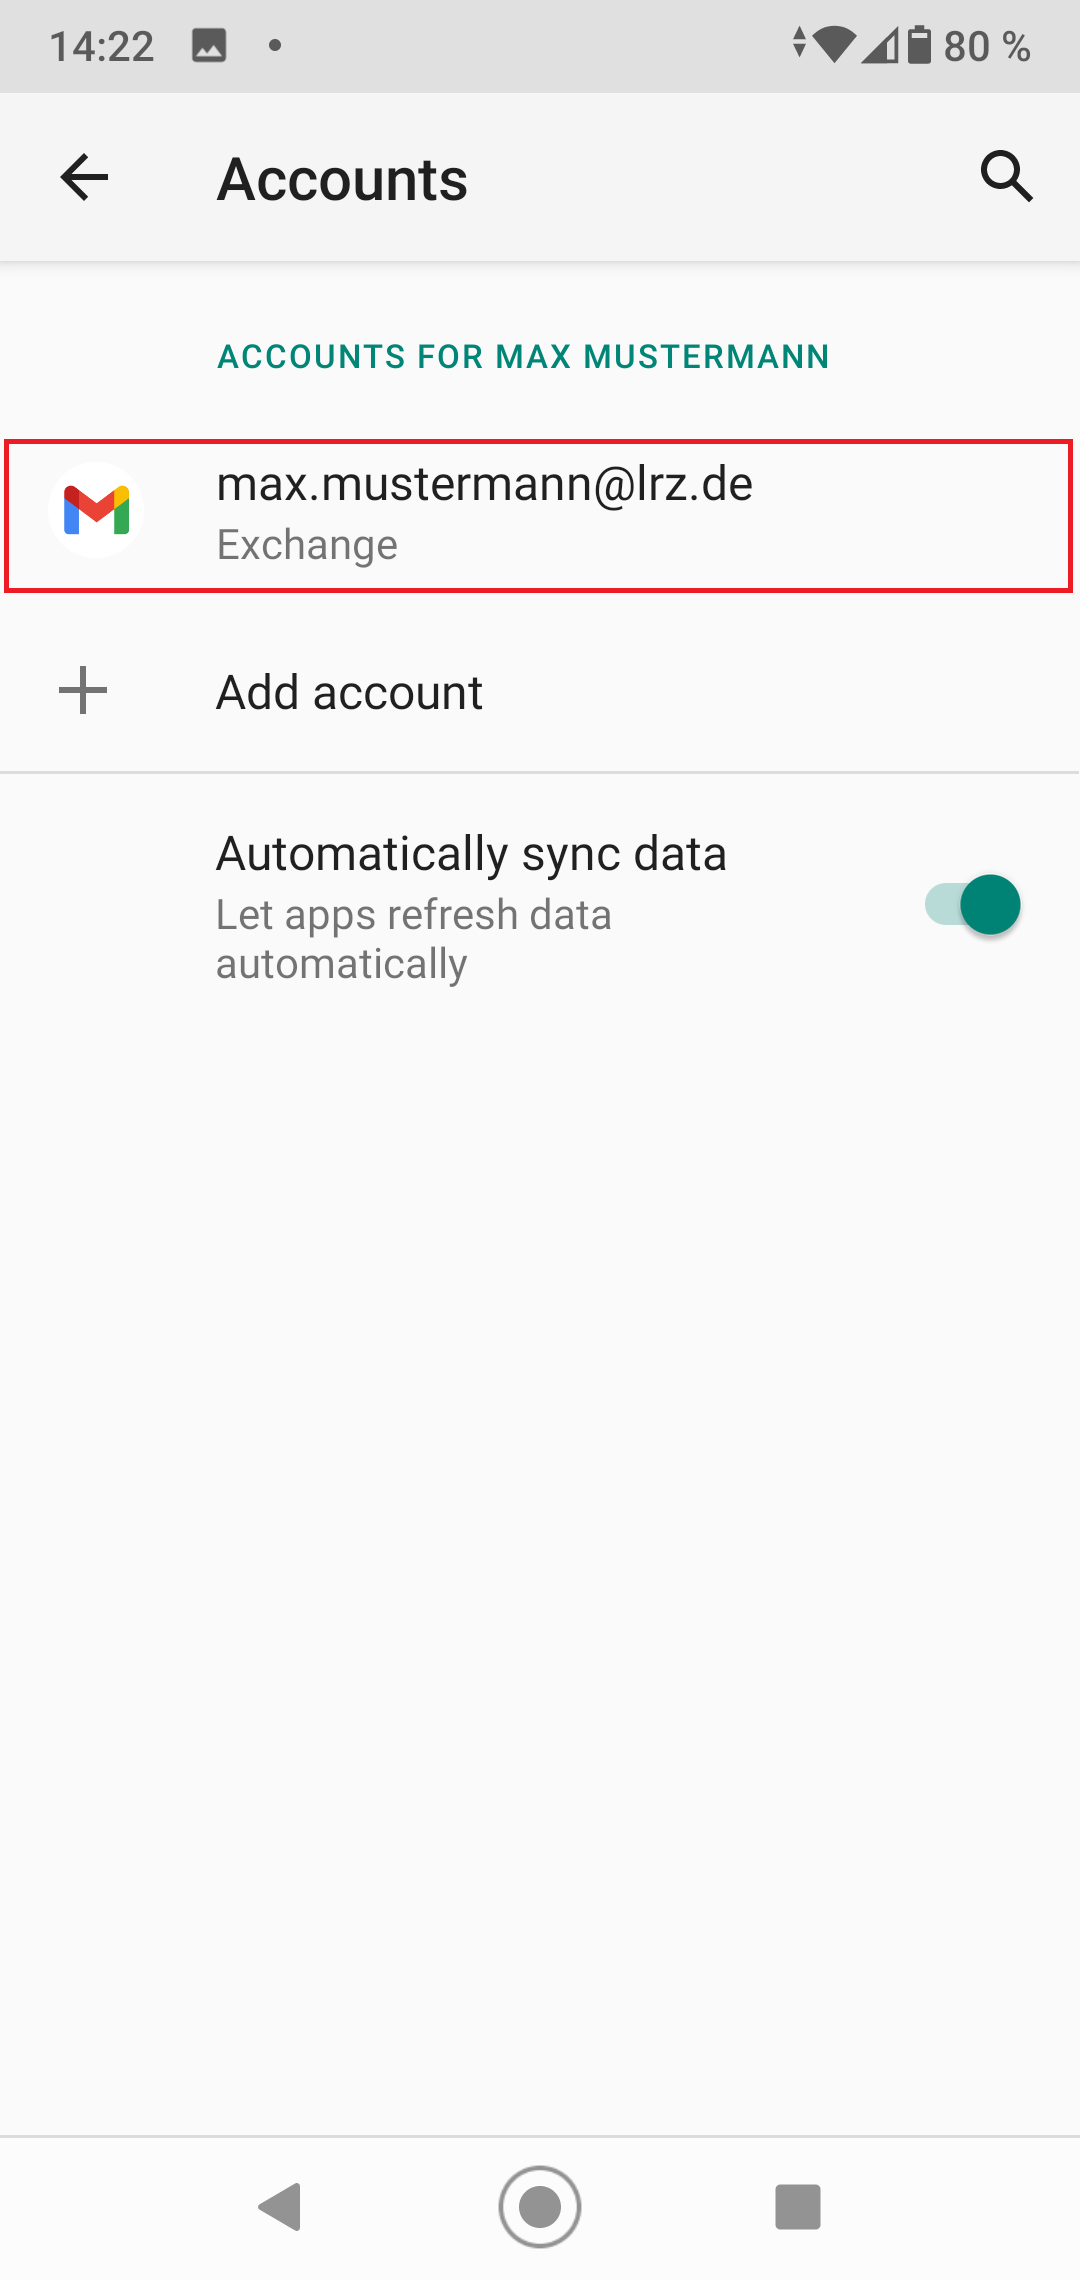 Left arrow for back, Accounts. Accounts for Max Mustermann. Selected Gmail logo, Max.Mustermann At lrz.de, Exchange. Plus sign, Add account. Hyphen. Automatically sync data, Lets apps refresh data automatically, slide switch on right.